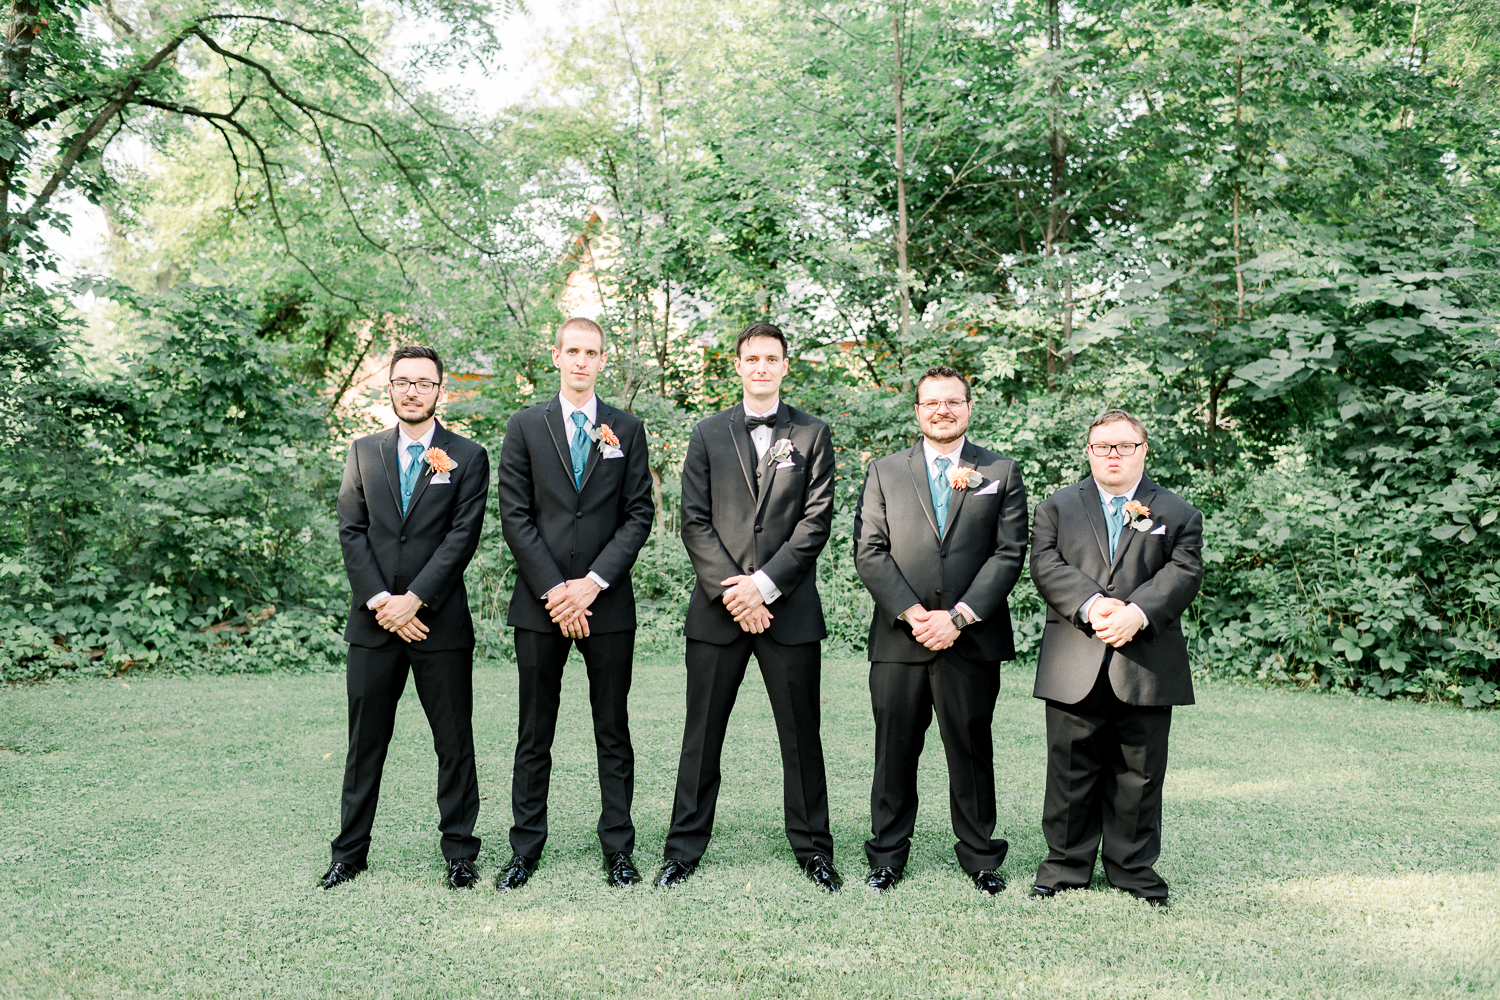 Groomsmen and groom lined up in a park